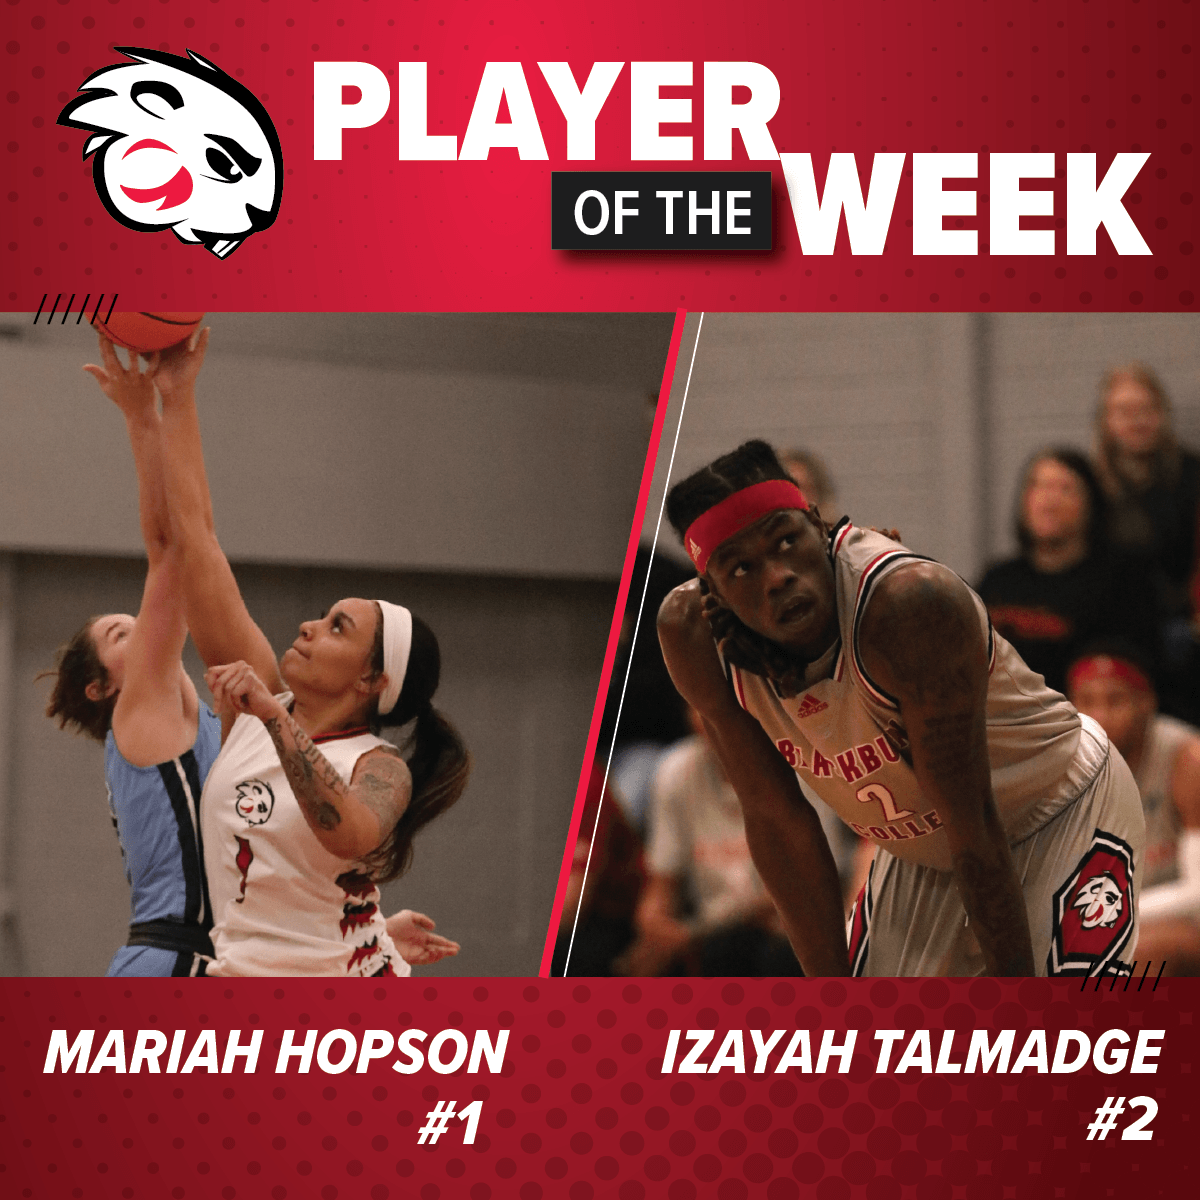 Congratulations to the BC Athletes of the Week - Mariah Hopson (Peoria, IL) and Izayah Talmadge (St. Louis, MO).

#blackburncollege #sliaction #d3hoops #believeinit #gobeavers